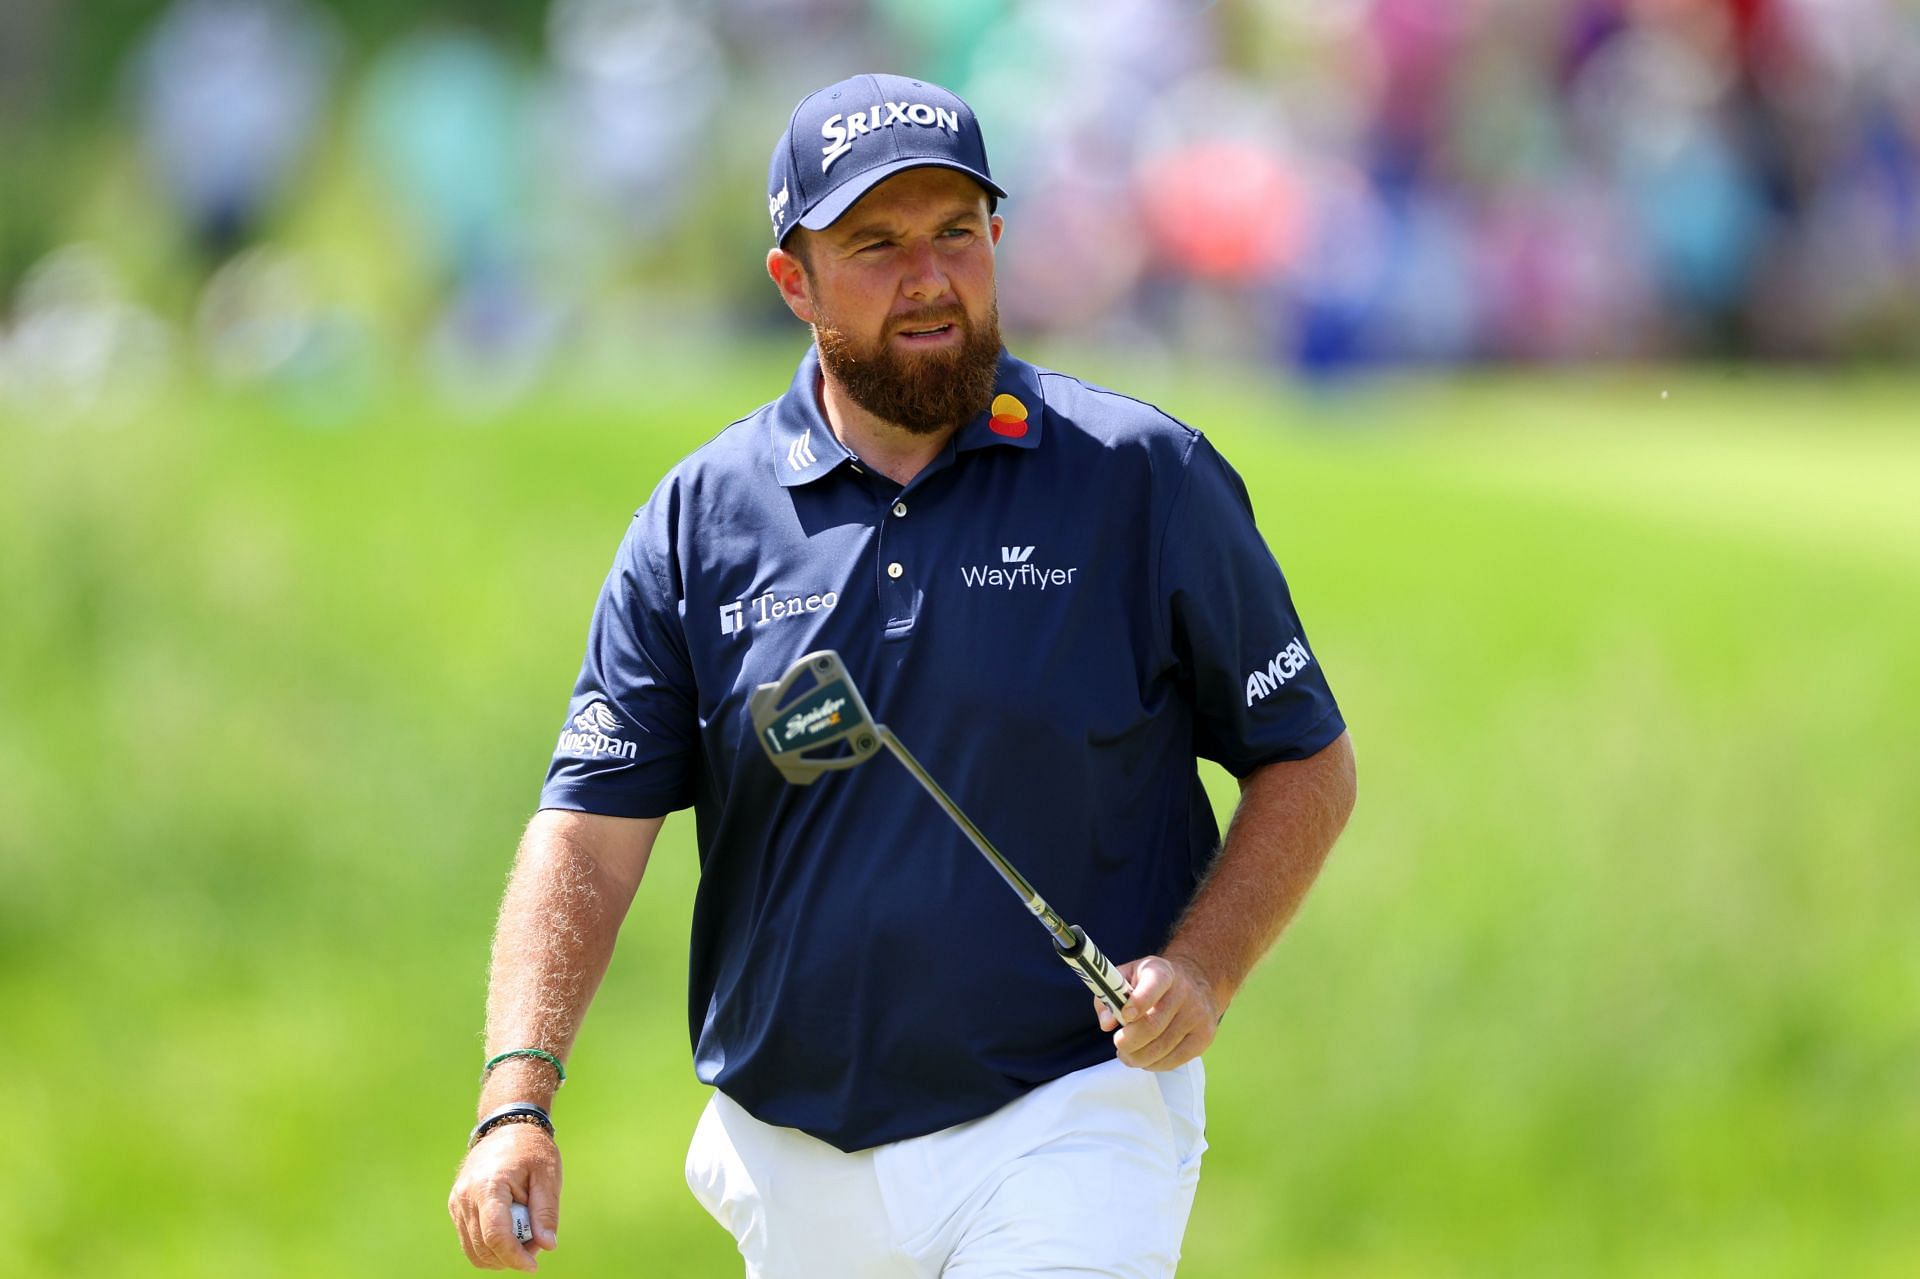 Shane Lowry shot low 62 on the third day at Valhalla